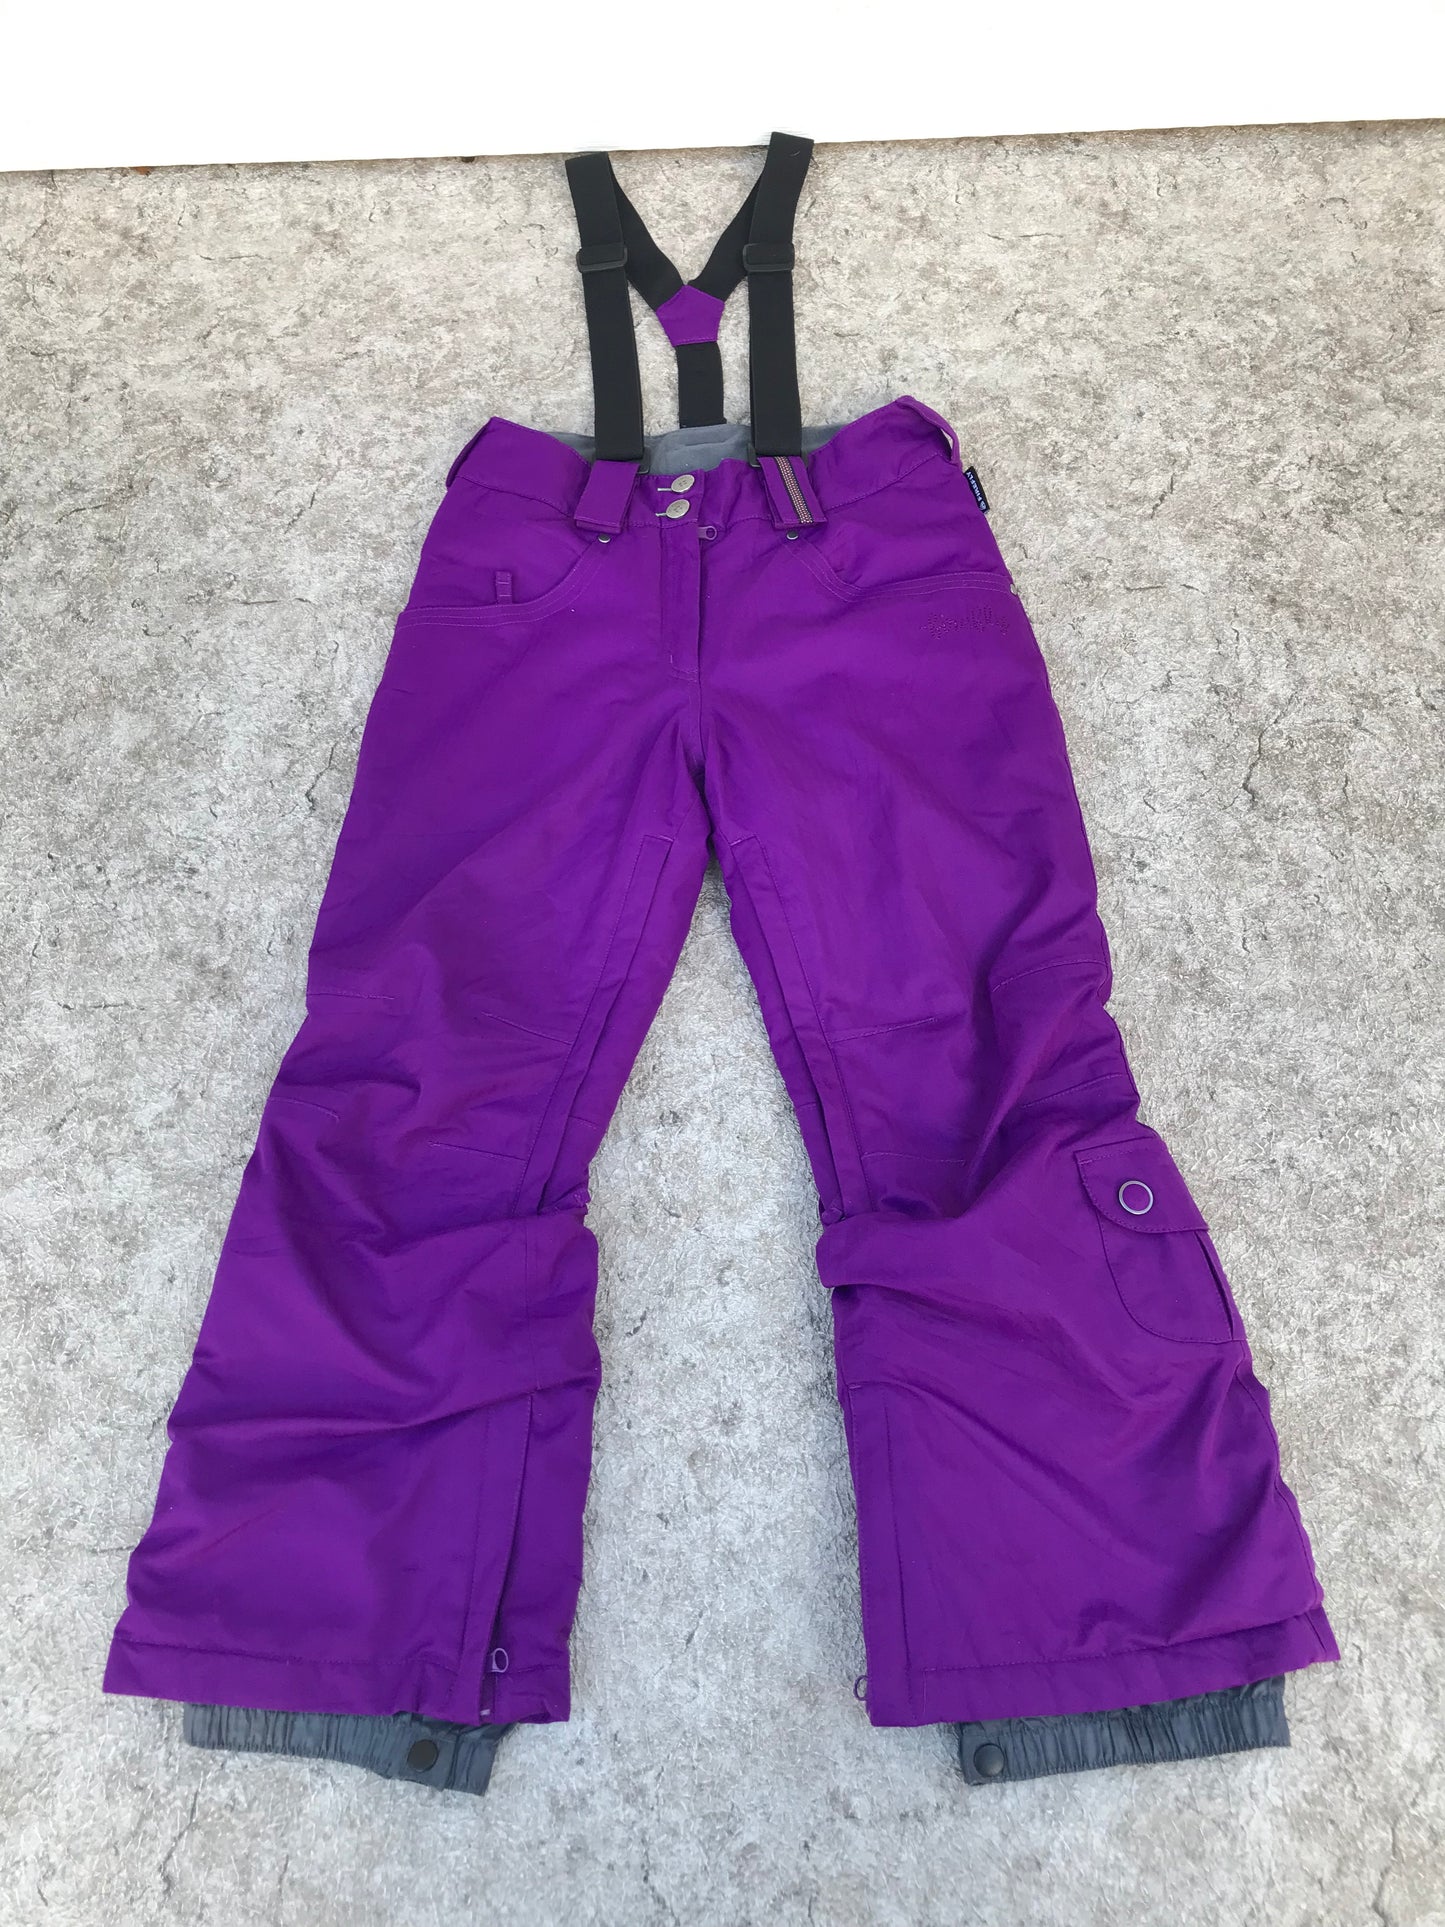 Snow Pants Child Size 8 Firefly Purple With Removeable Straps Excellent